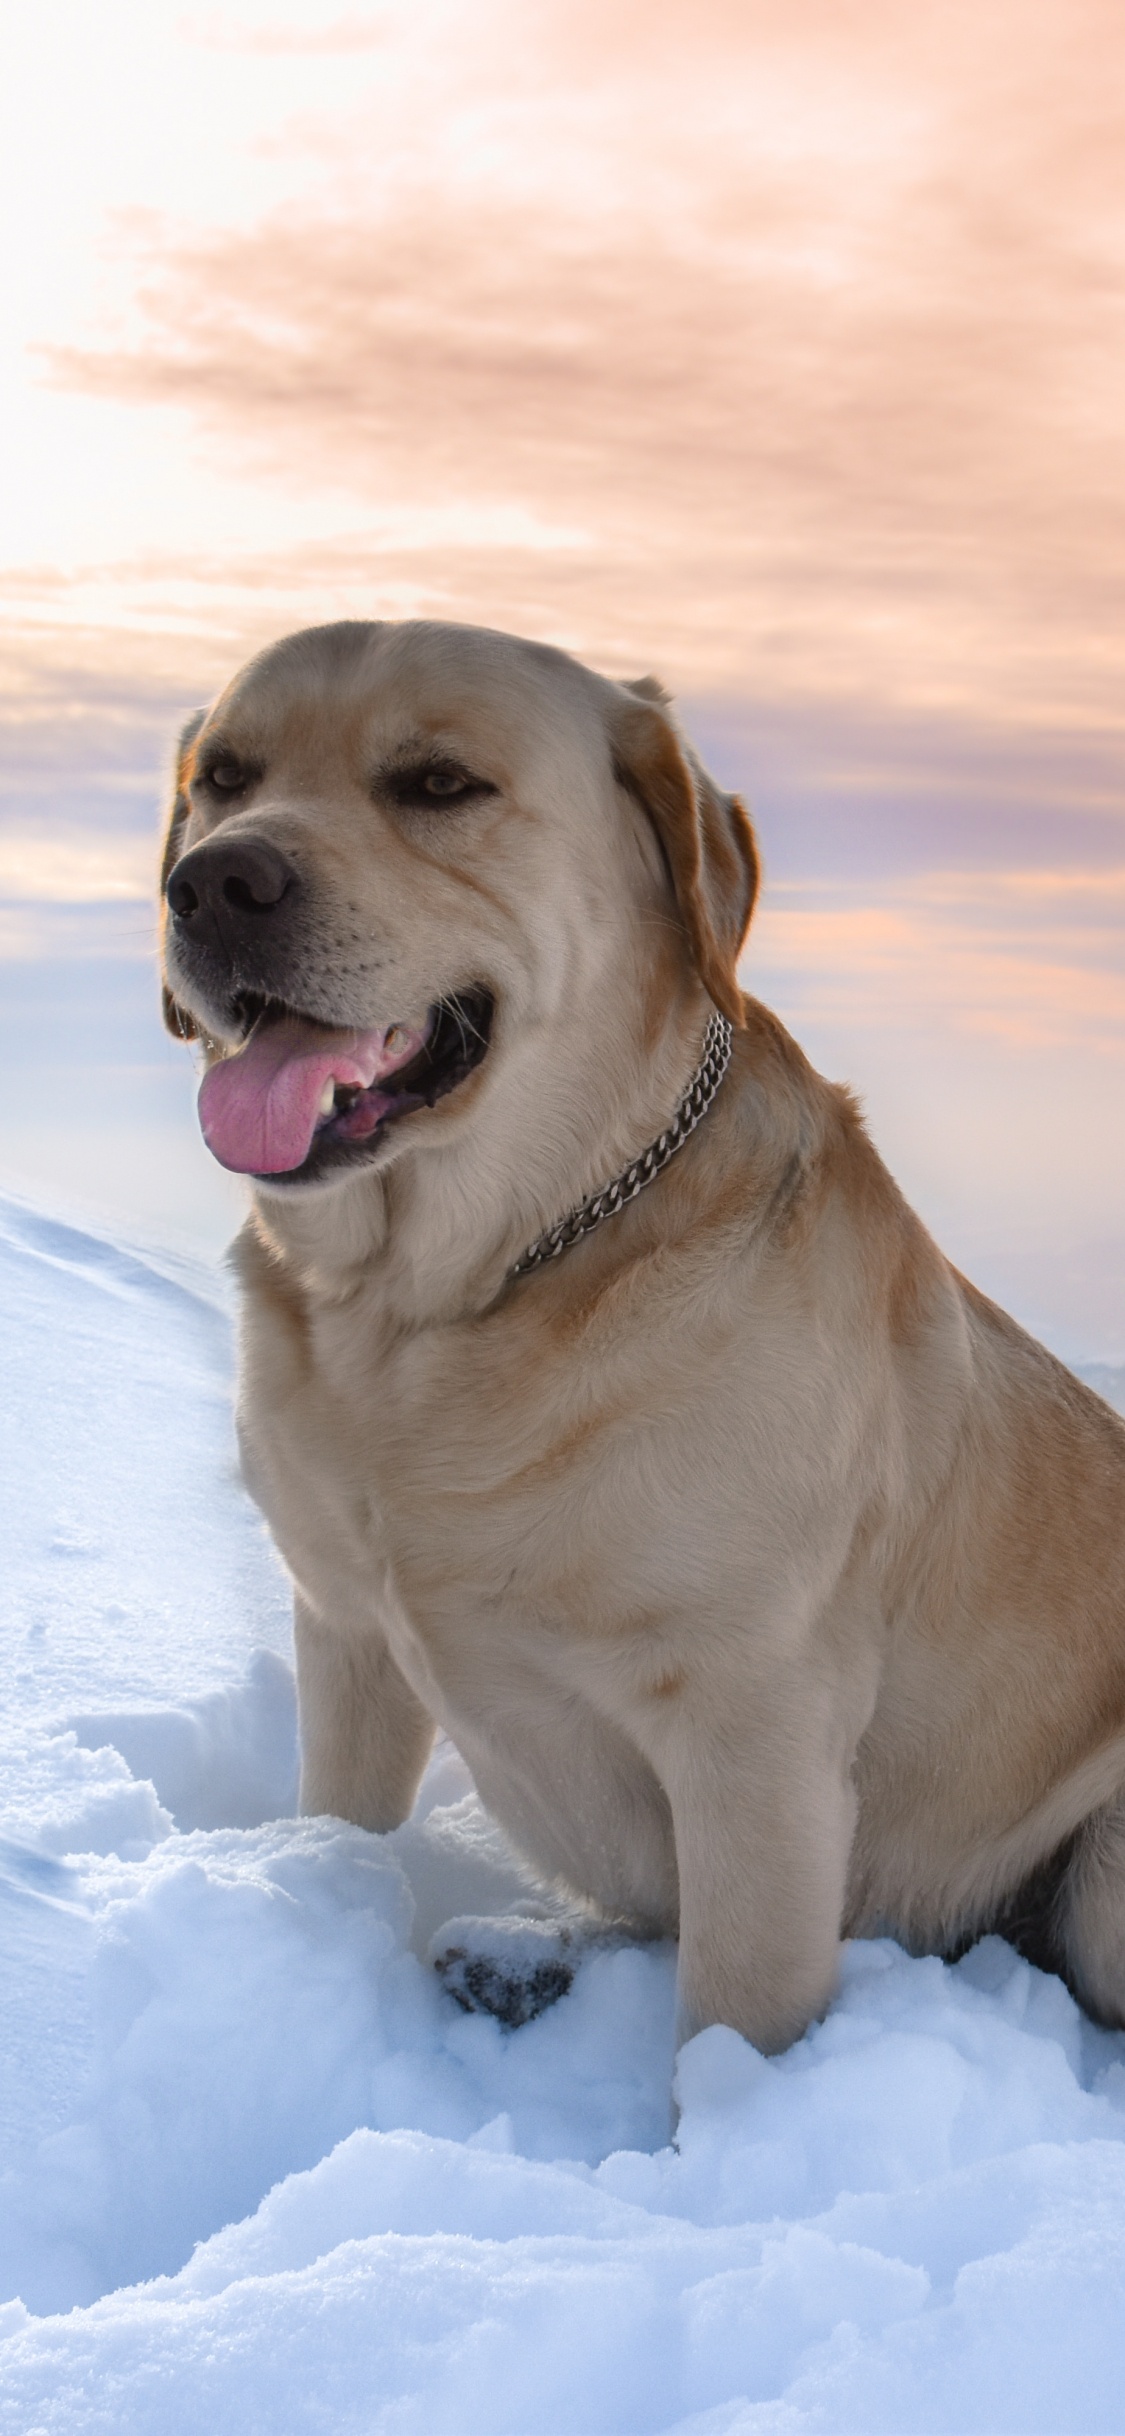 Brown Short Coated Dog on Snow Covered Ground During Daytime. Wallpaper in 1125x2436 Resolution